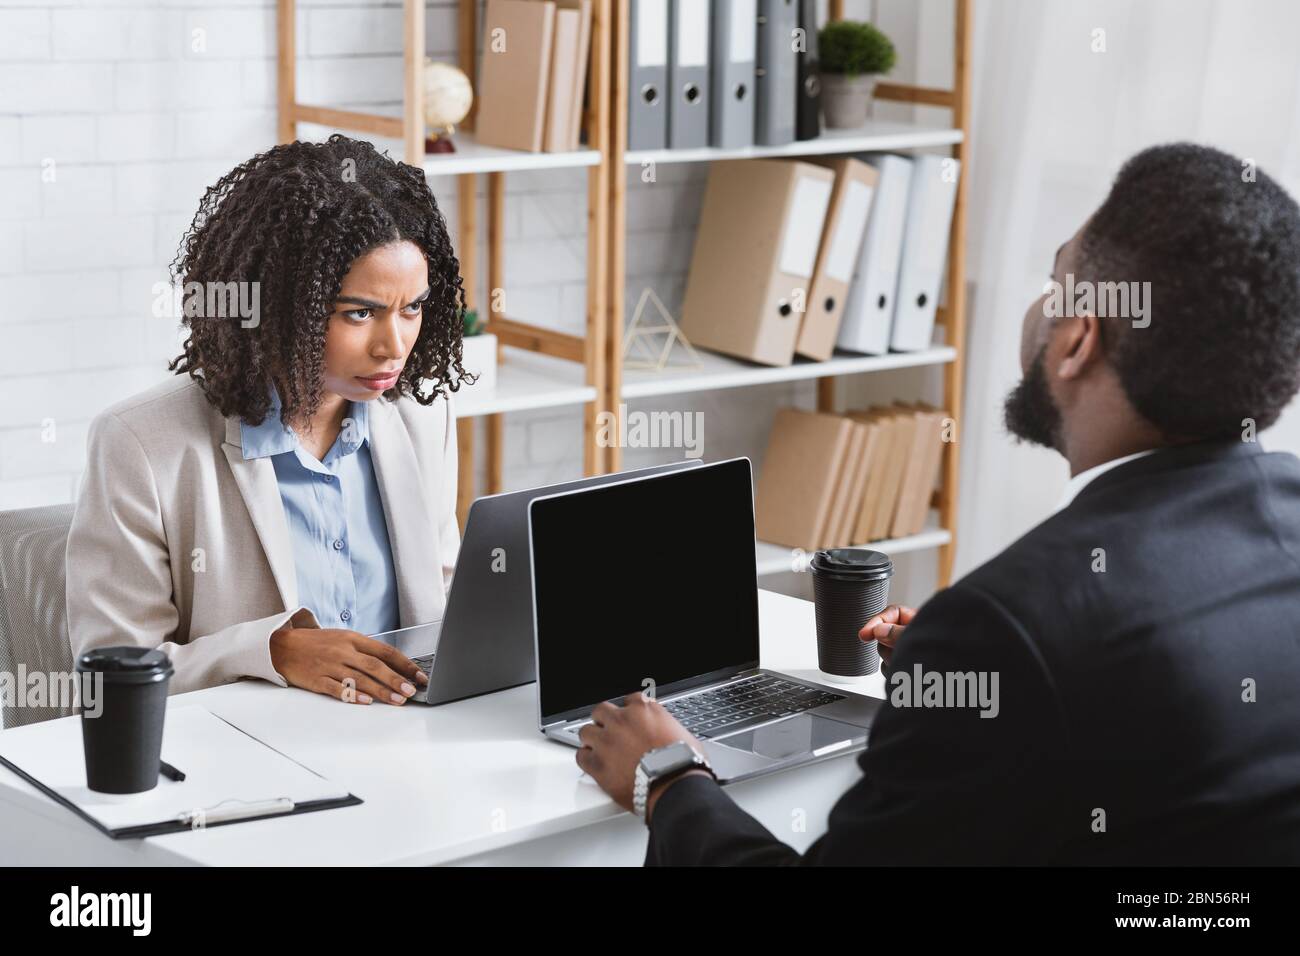 Annoyed African American woman having disagreement with her colleague at workplace, copy space Stock Photo